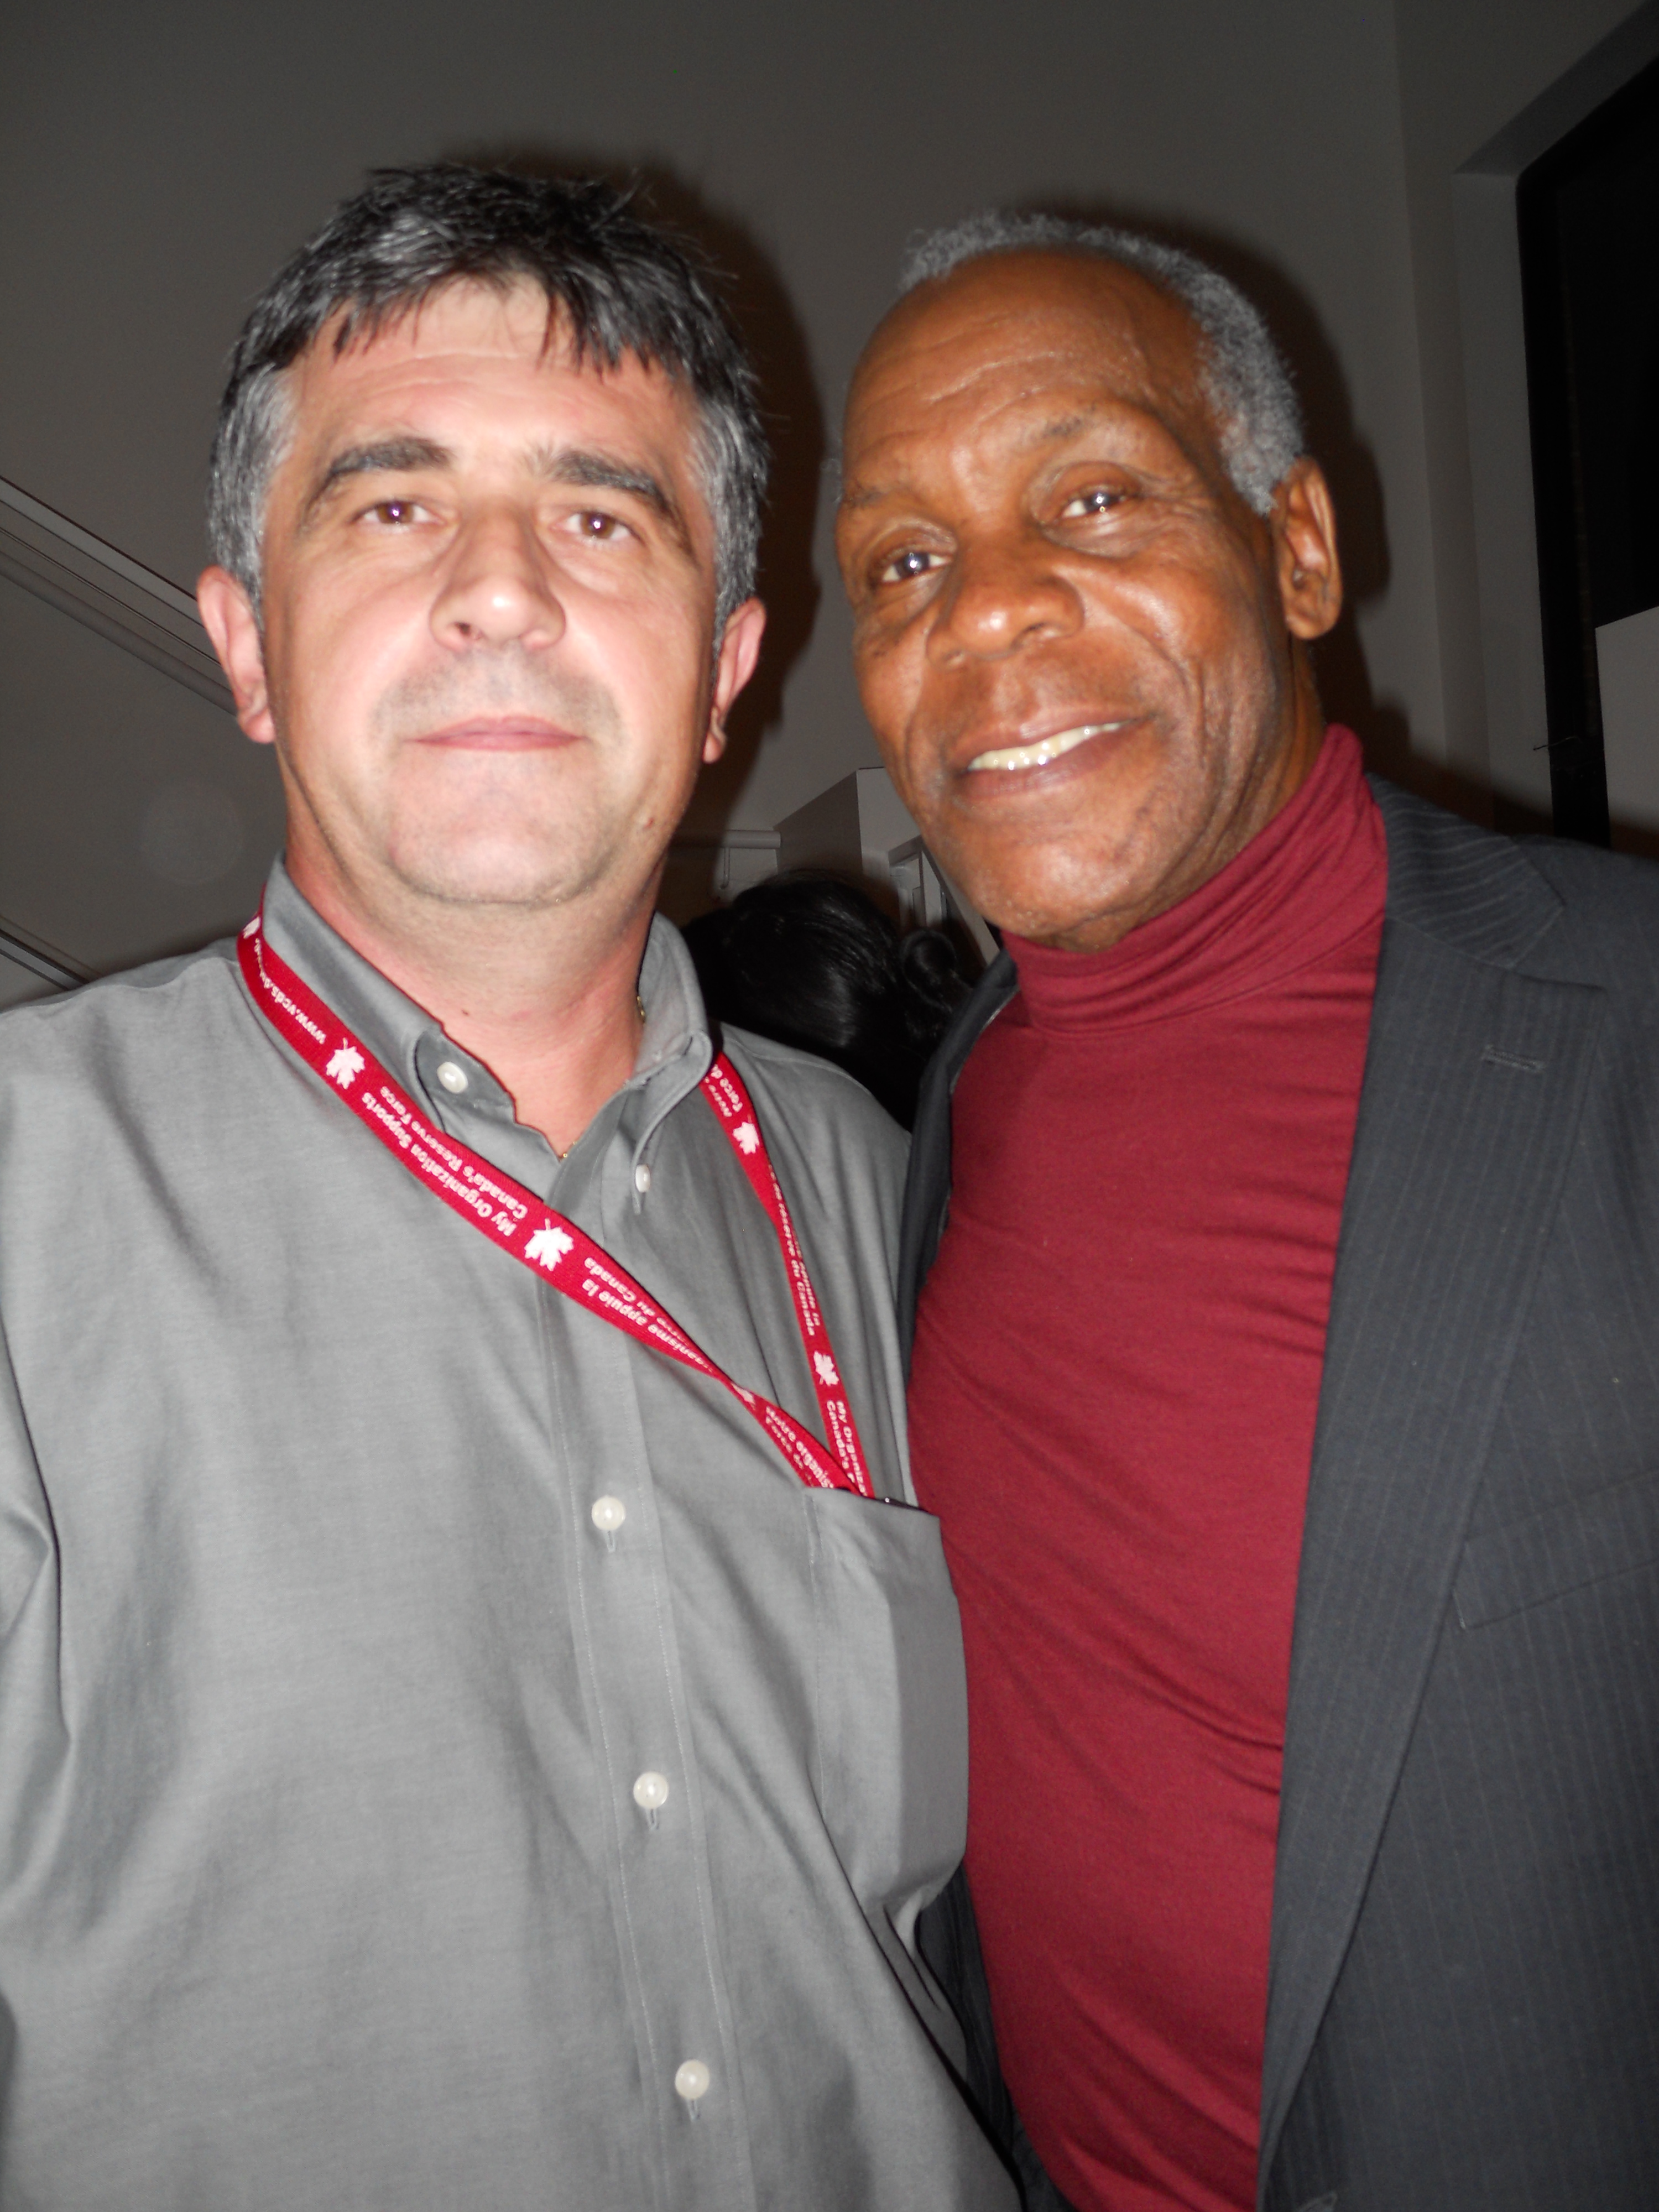 Danny Glover's Documentary Premiere at TIFF